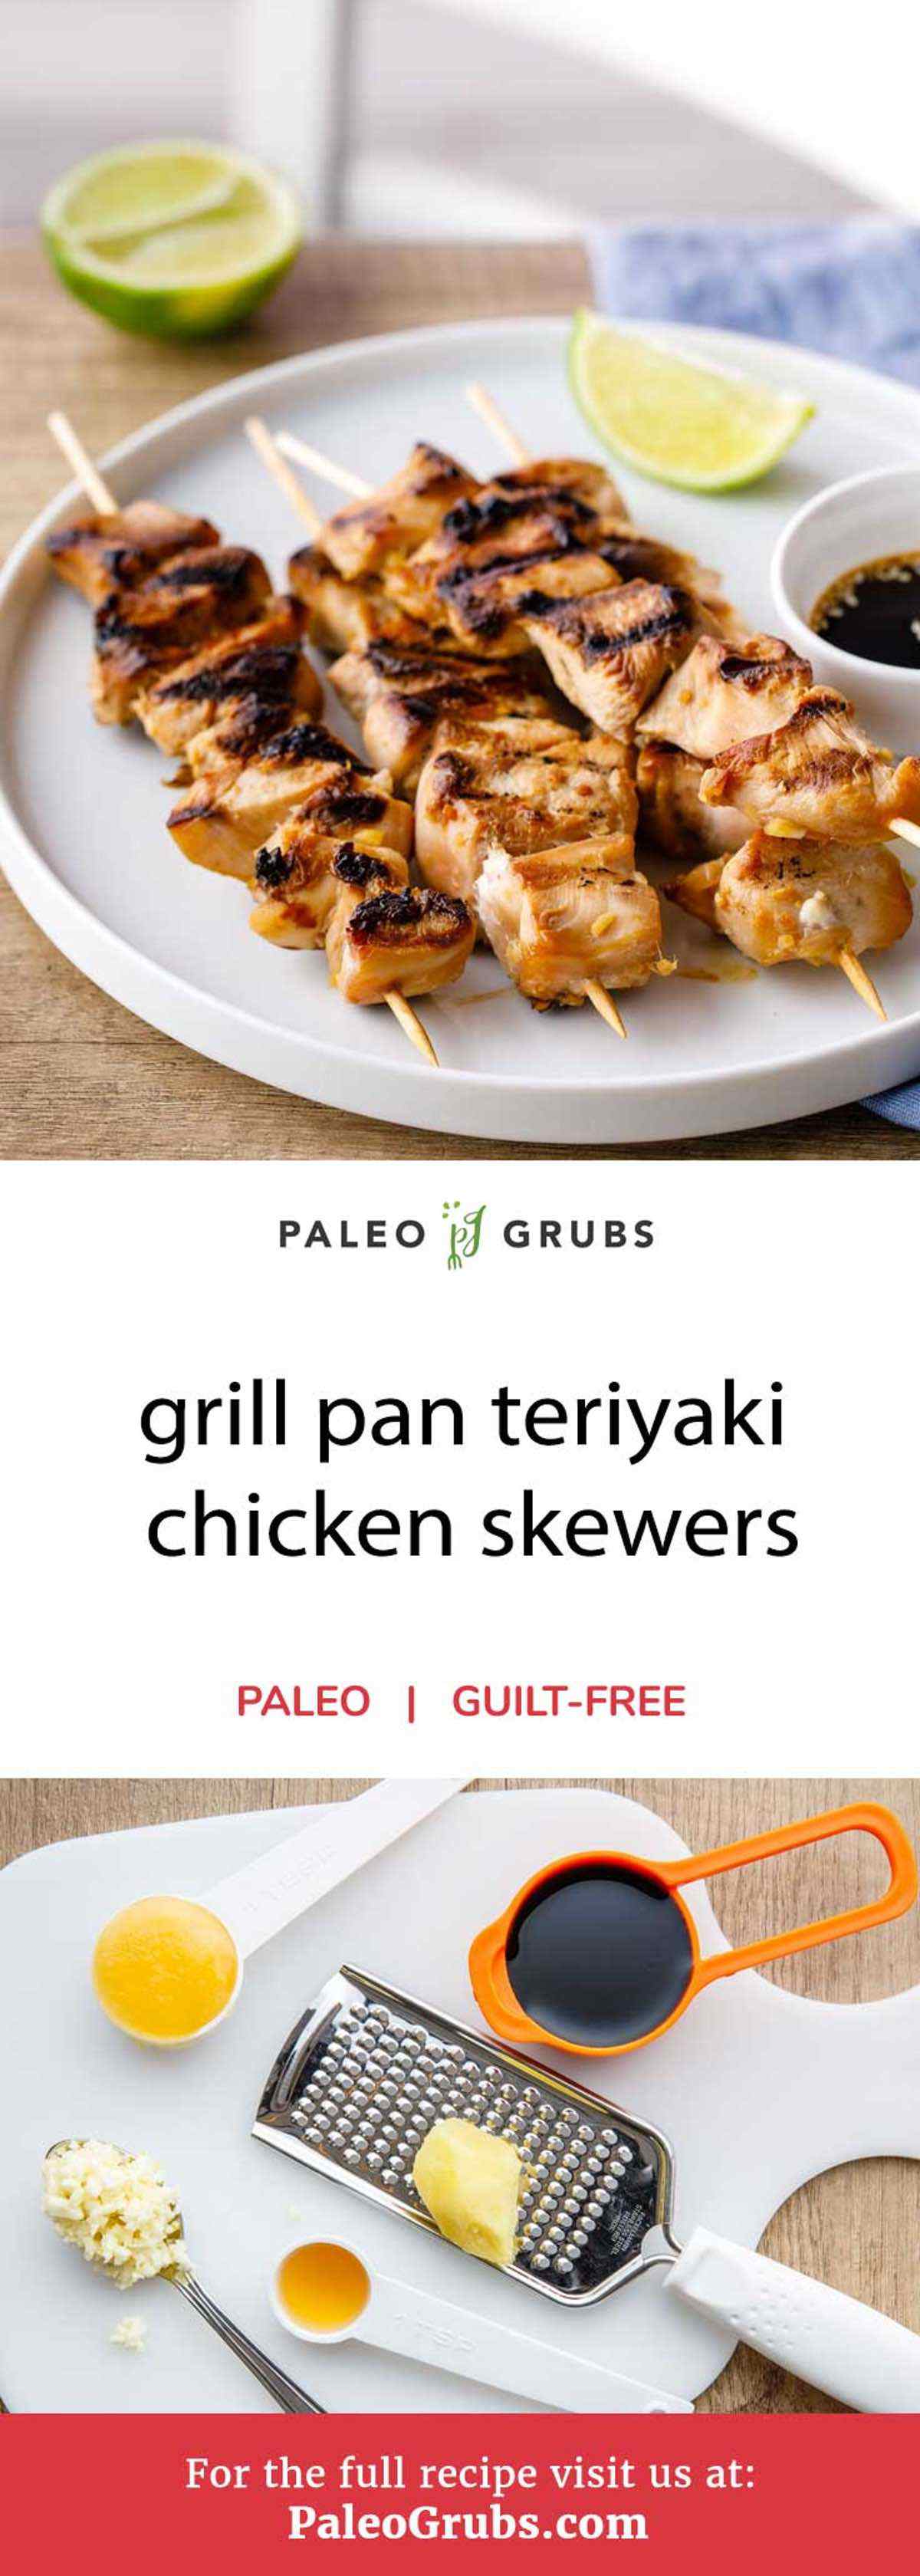 This recipe for grill pan teriyaki chicken skewers is a must try! It features juicy pieces of white meat chicken breast that have been marinated in a 100% paleo-friendly homemade teriyaki sauce. The sauce itself is incredibly easy to prepare, but don’t let that fool you -- I’m not sure if I have ever in my life tried a marinade sauce that is as good as this teriyaki mix.